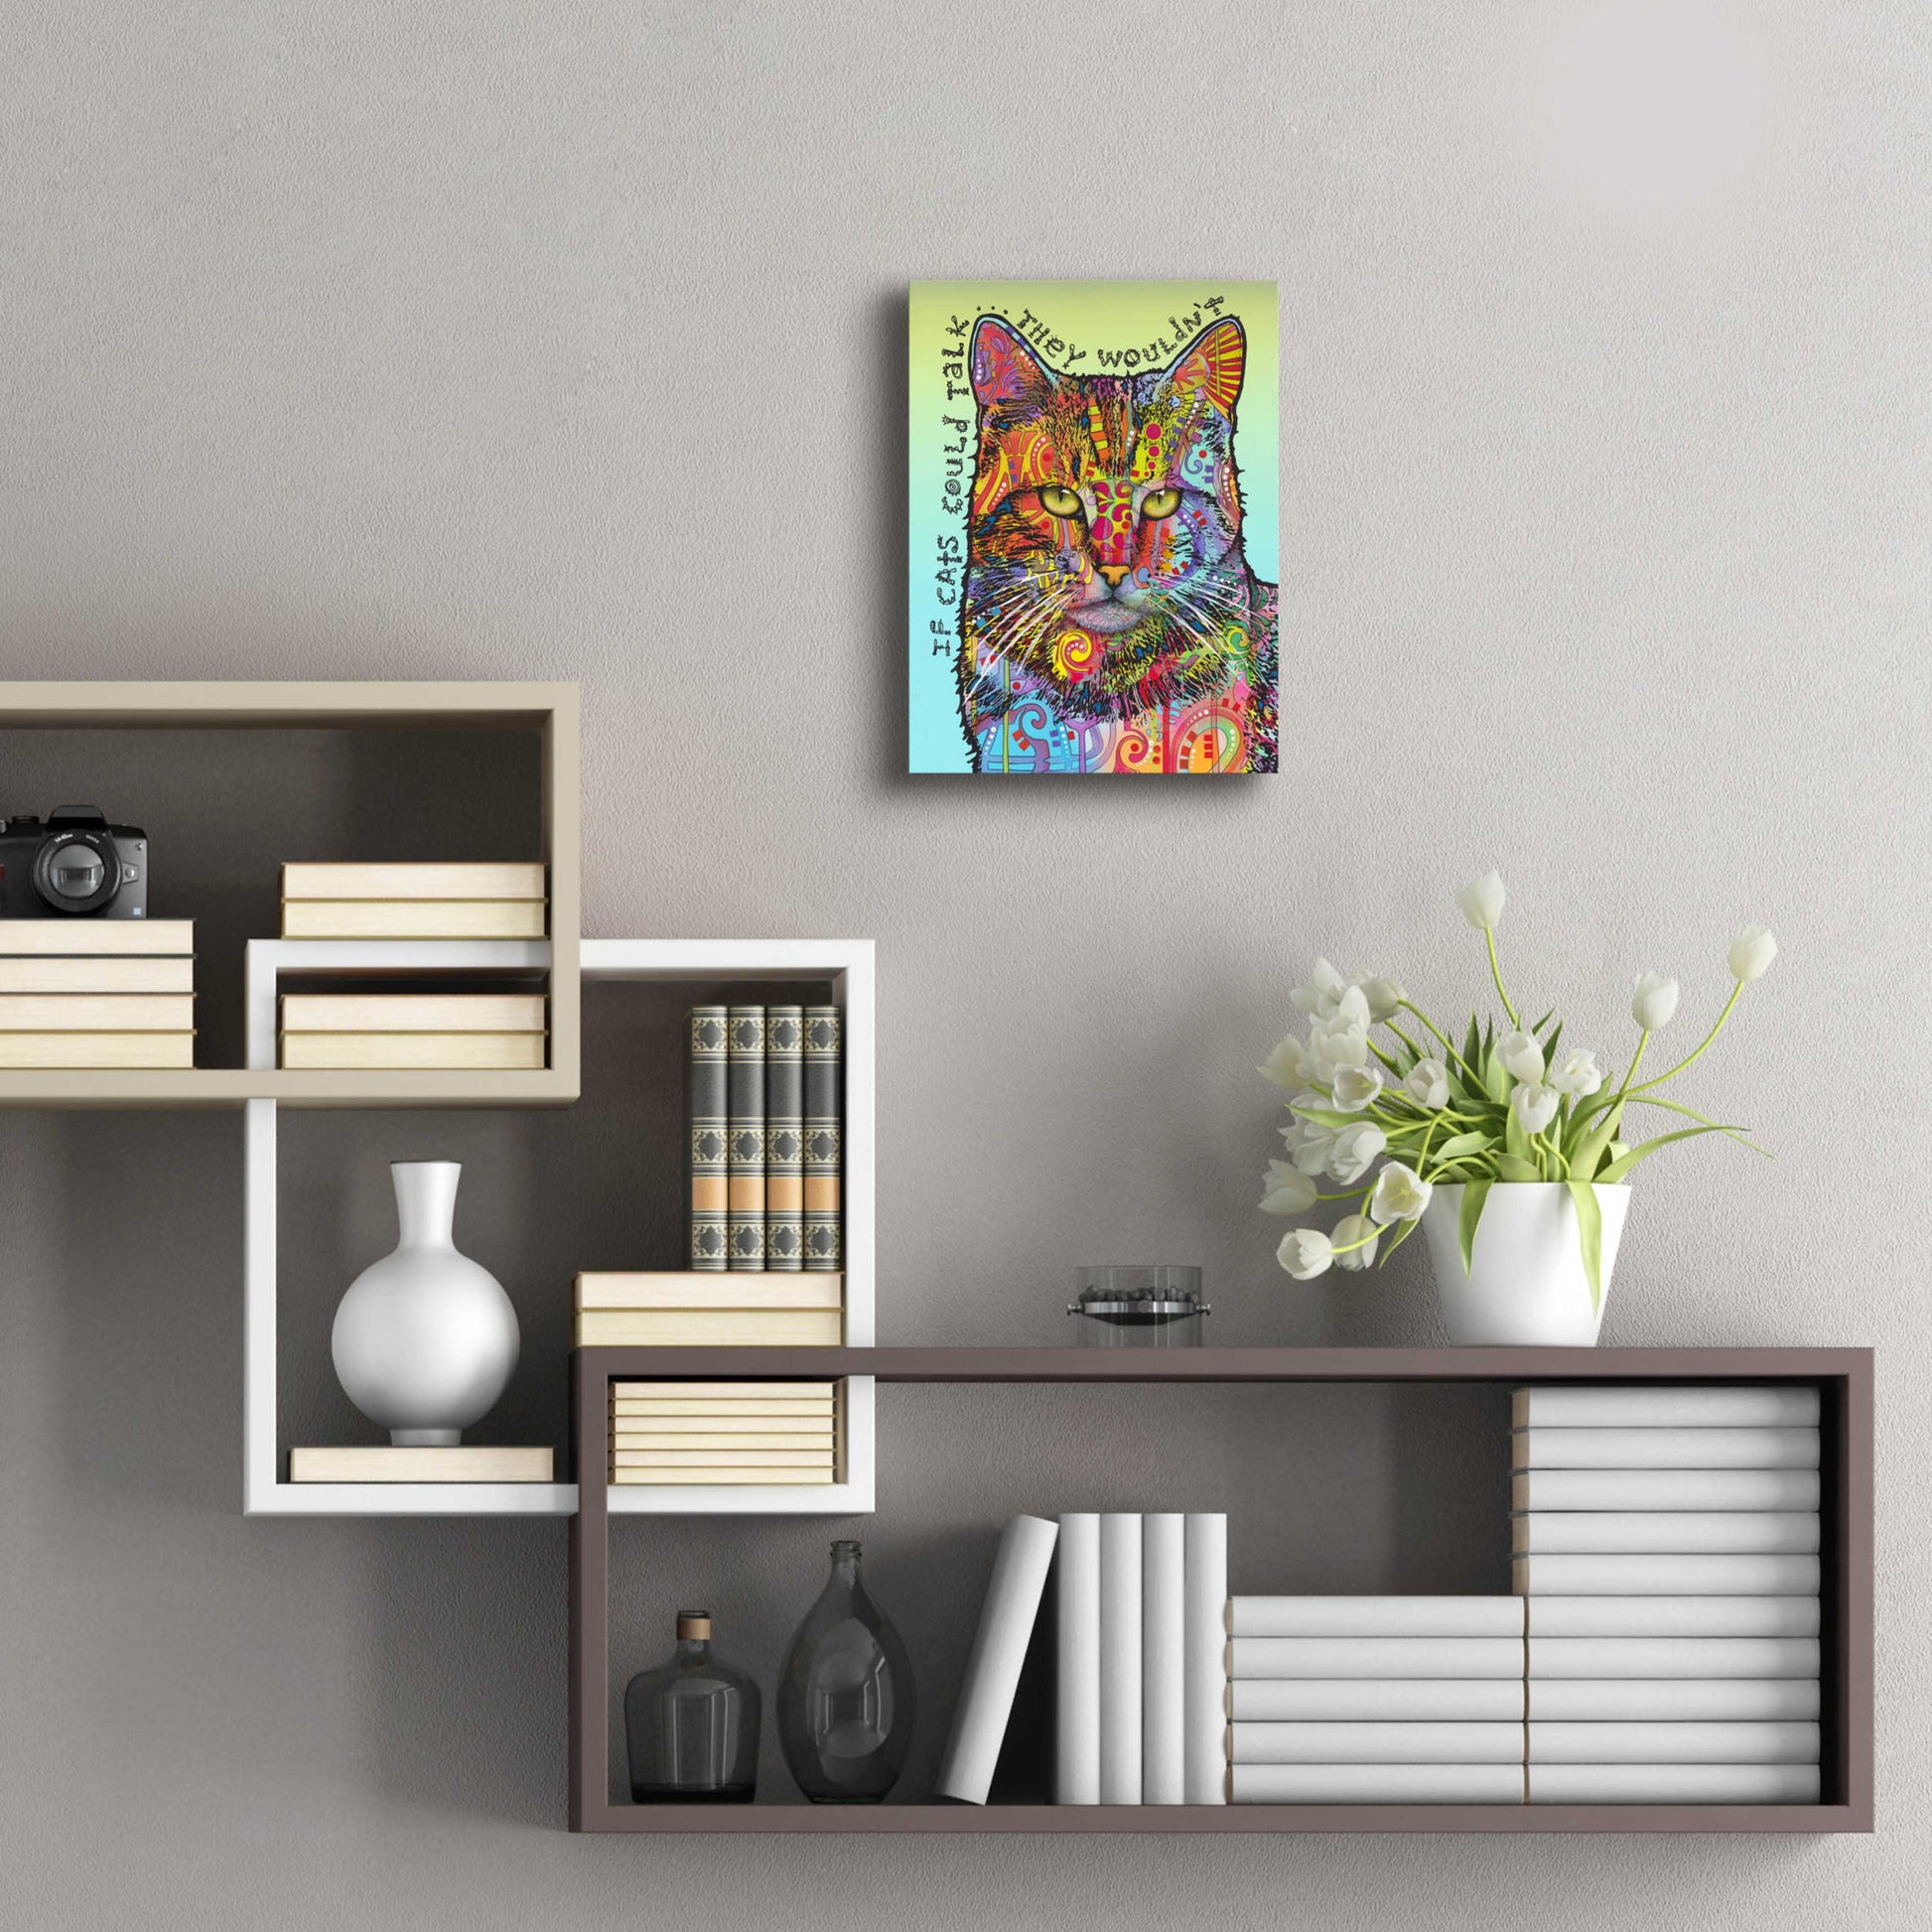 Epic Art 'If Cats Could Talk' by Dean Russo, Acrylic Glass Wall Art,12x16